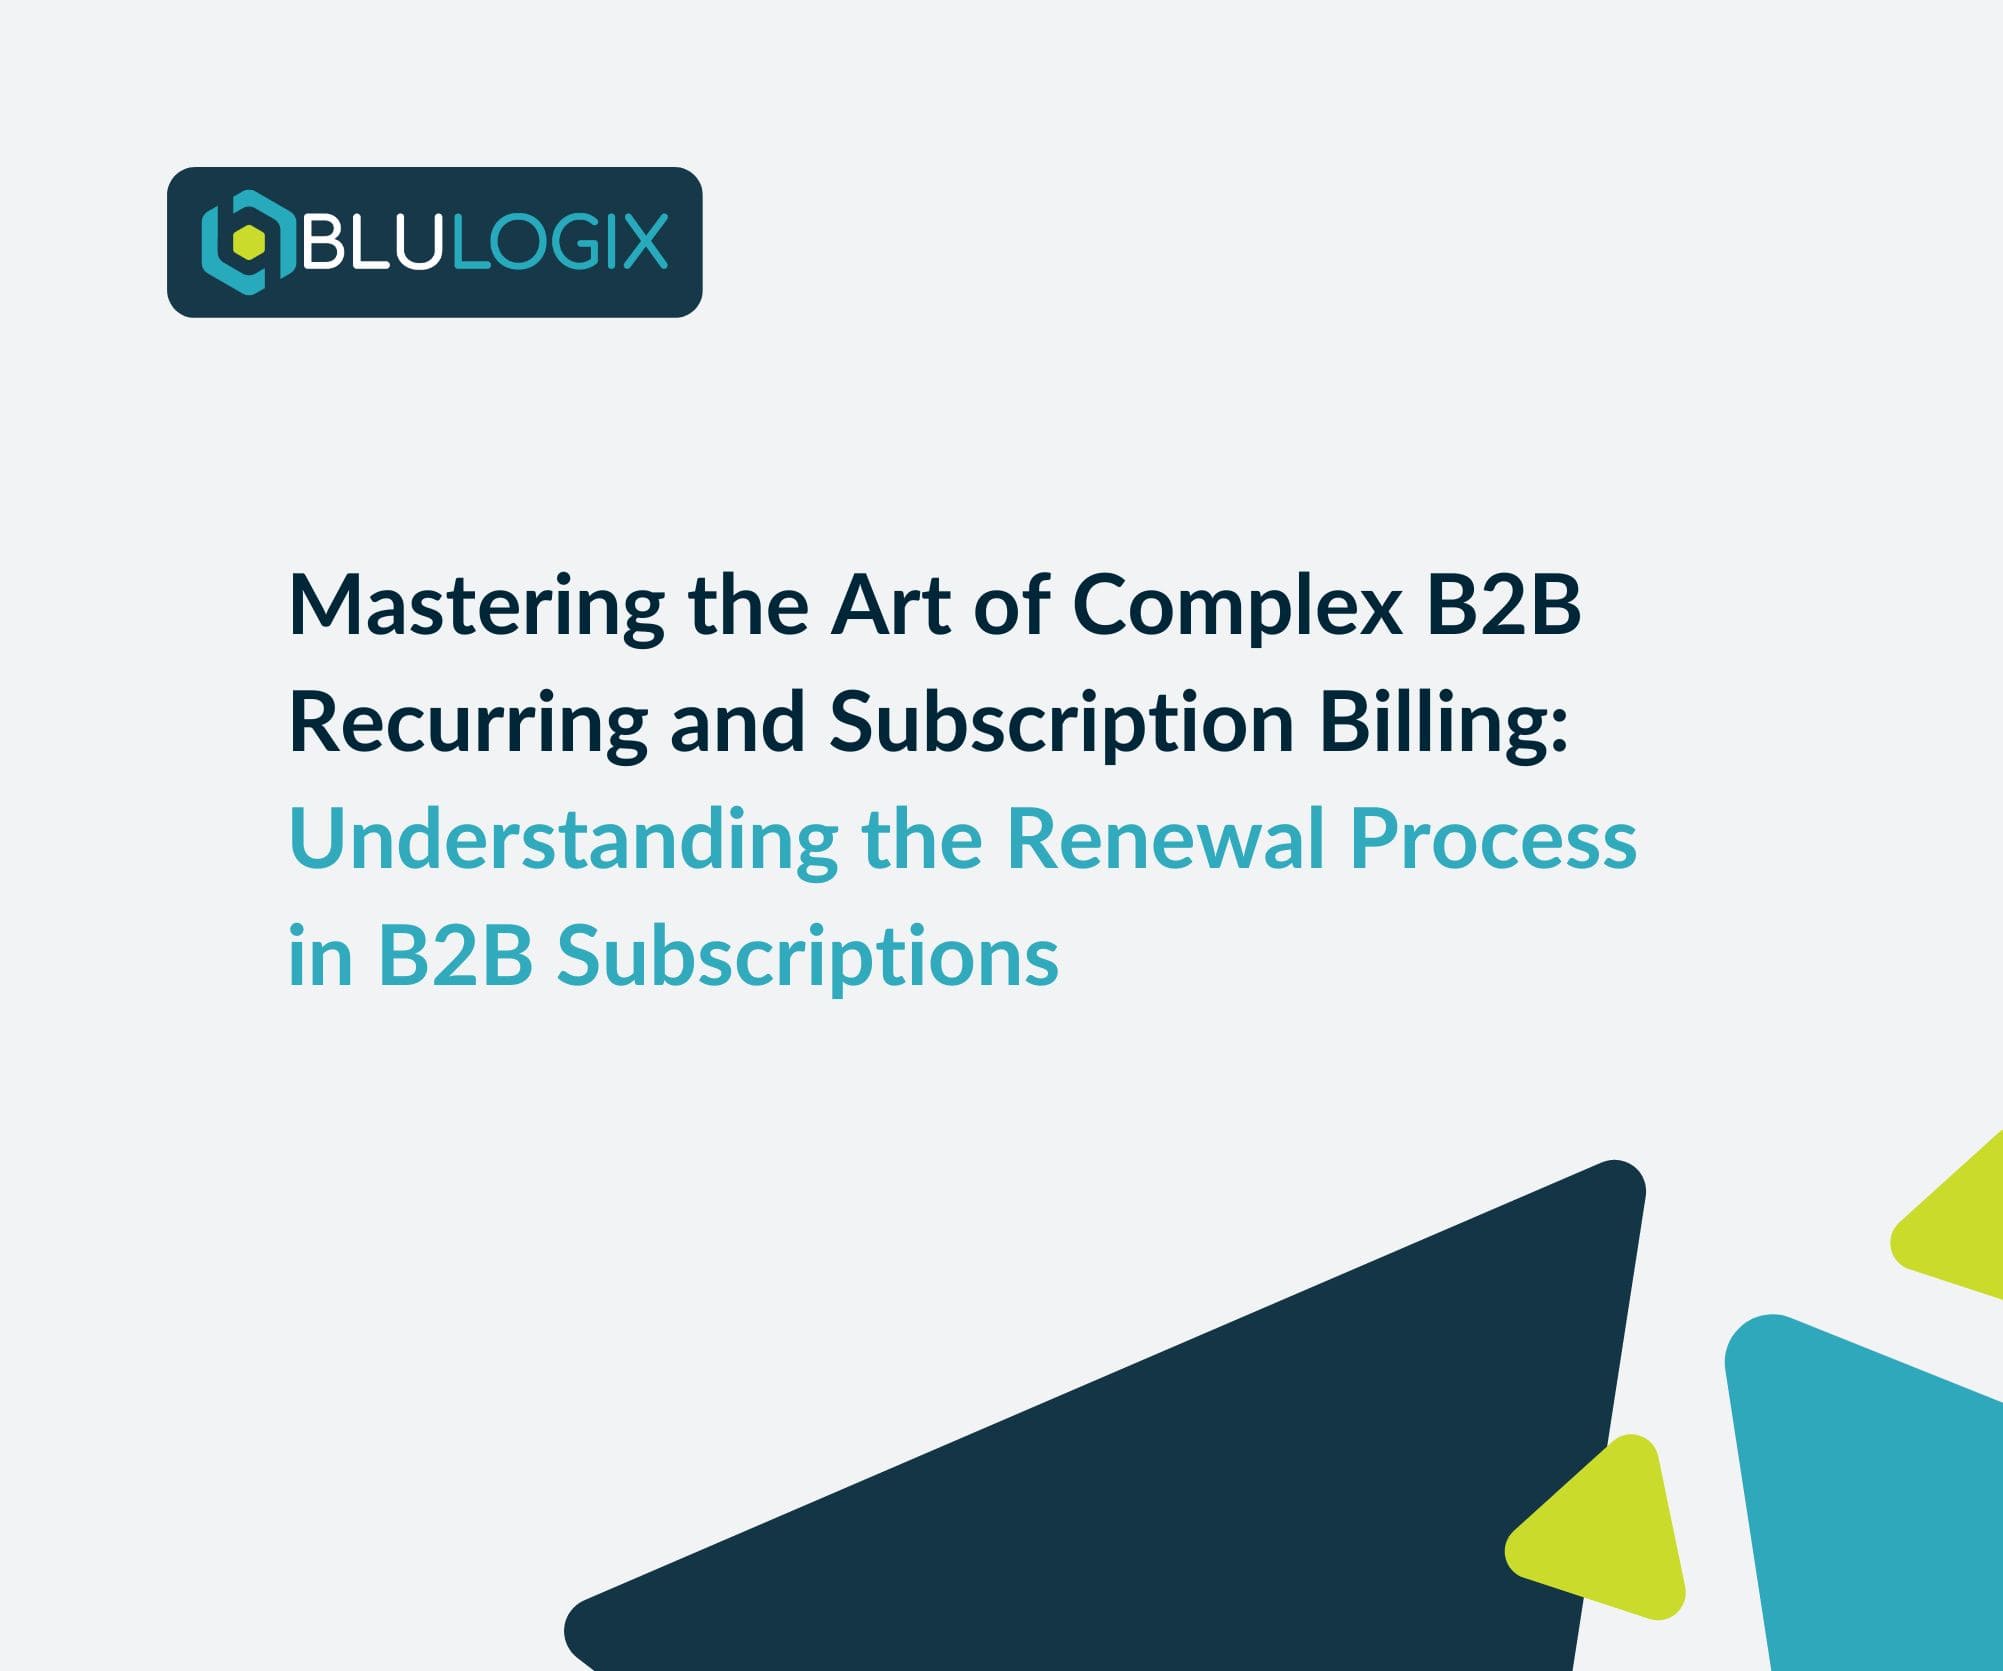 Understanding the Renewal Process in B2B Subscriptions